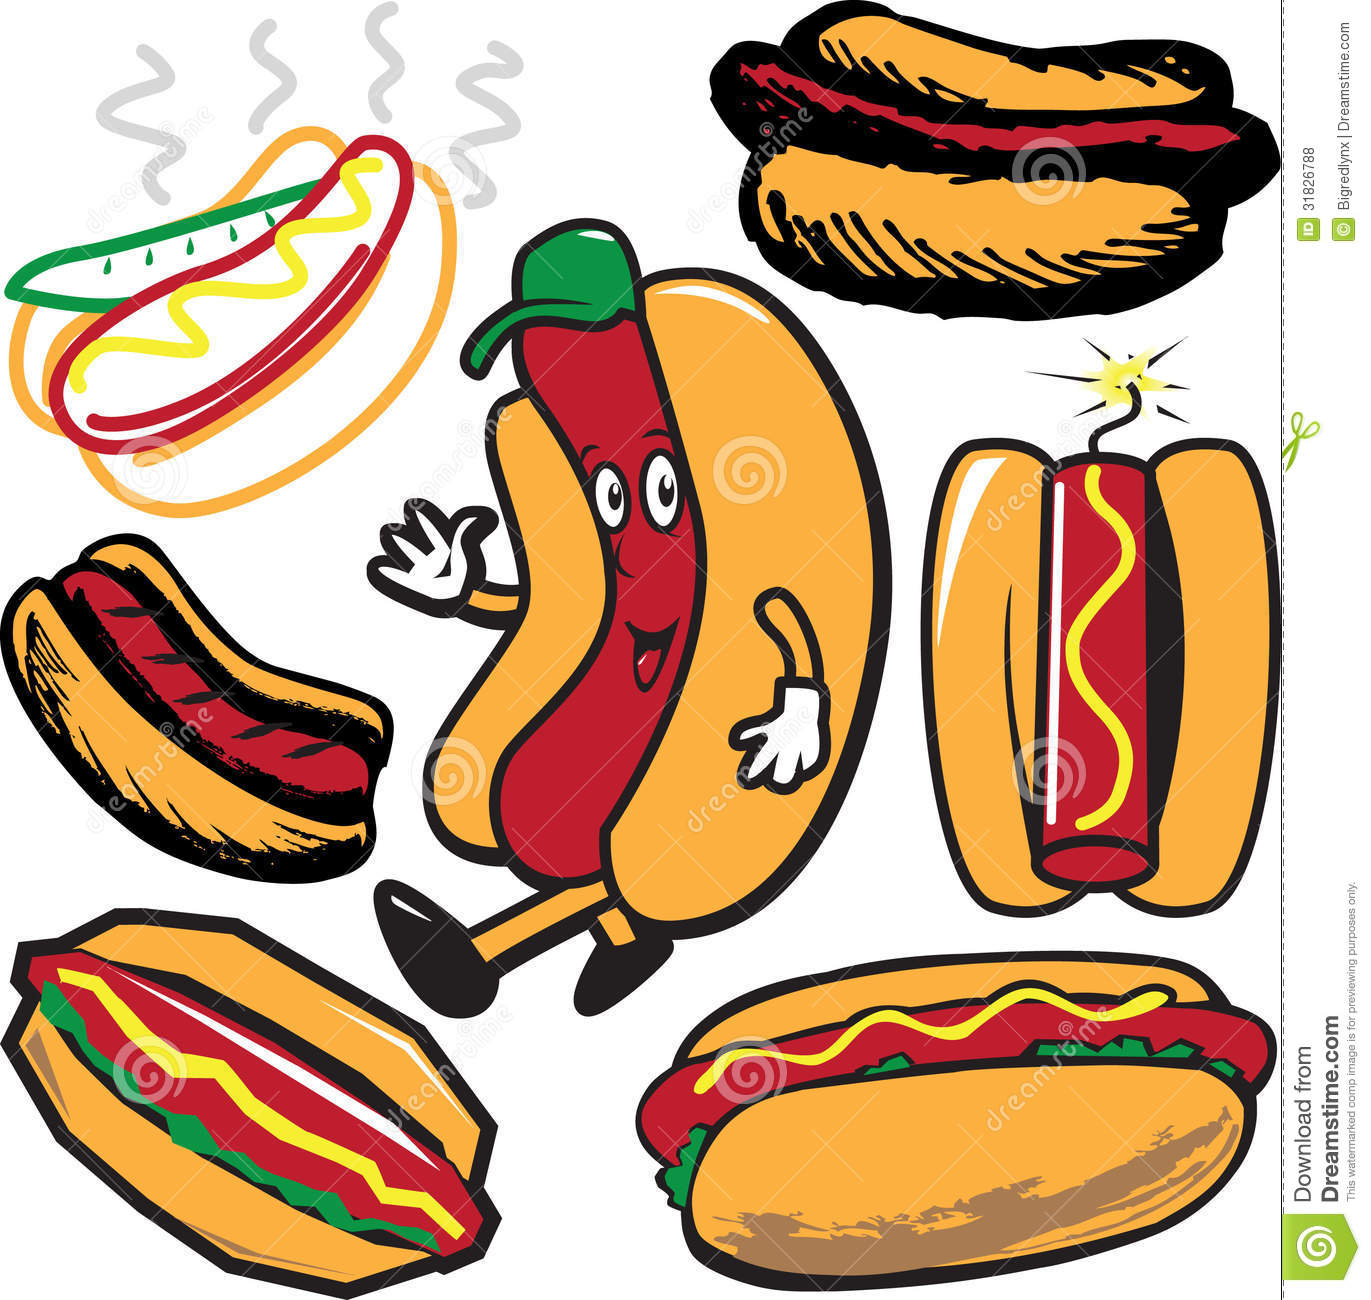 31637 Food free clipart.